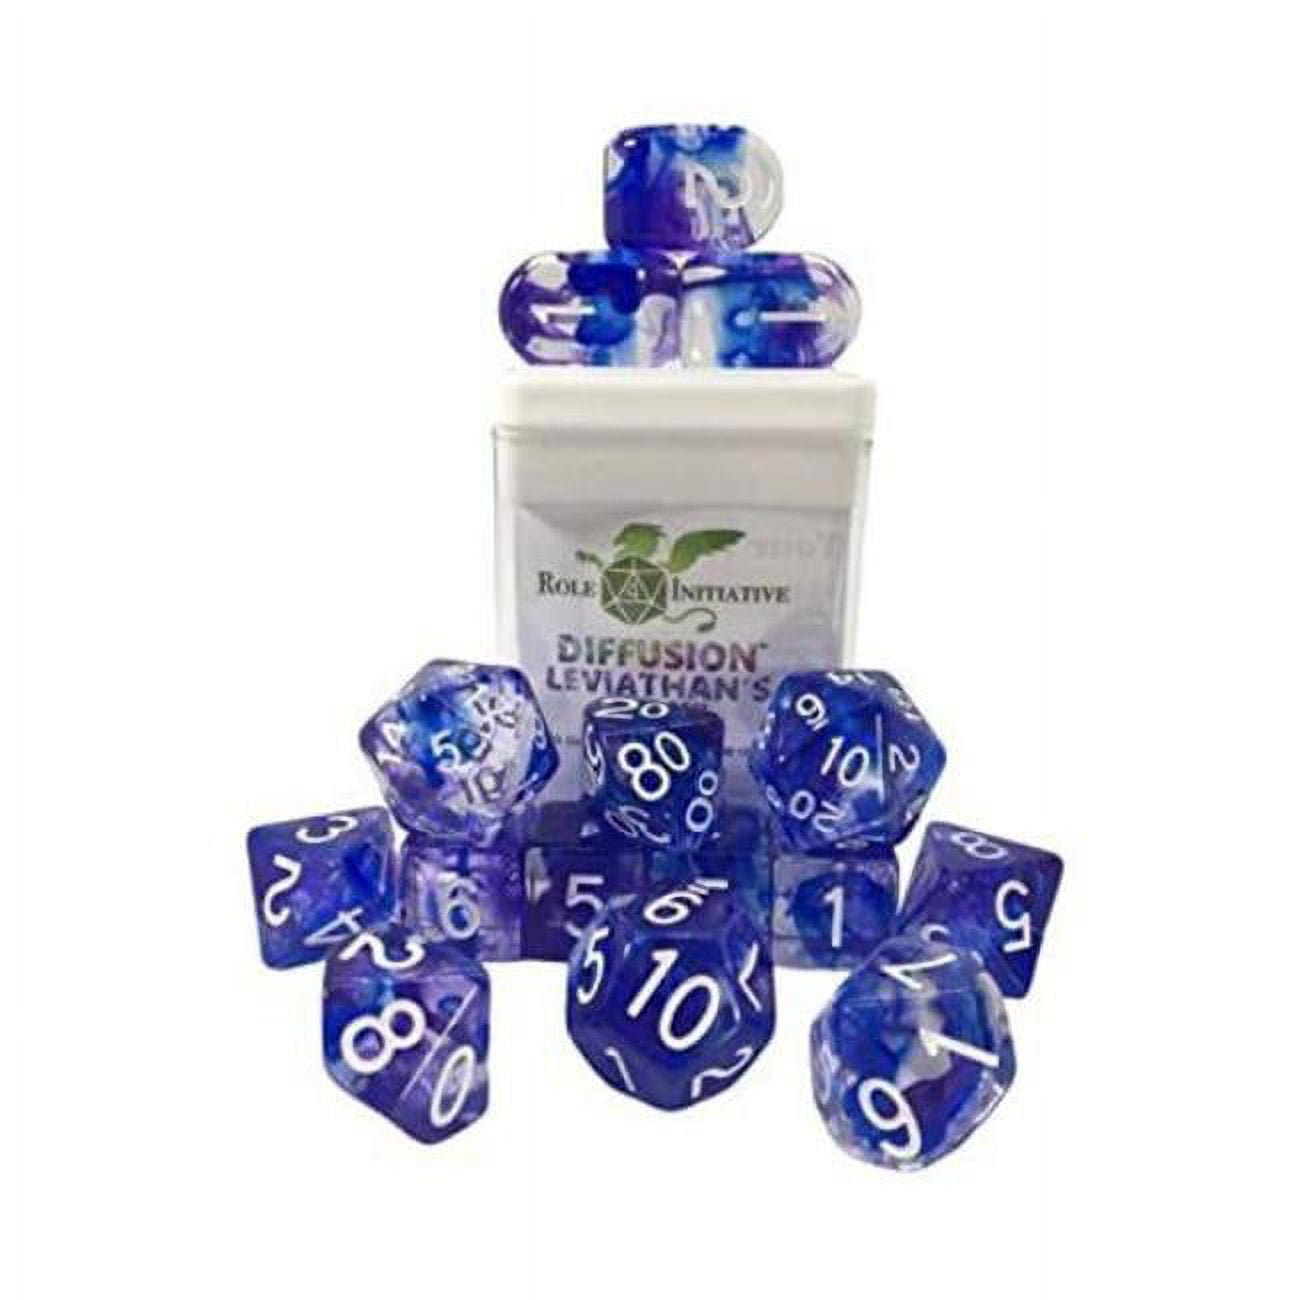 Picture of Role 4 Initiative R4I50537-FC-S Diffusion Leviathans Wake SPR Dice, Set of 15